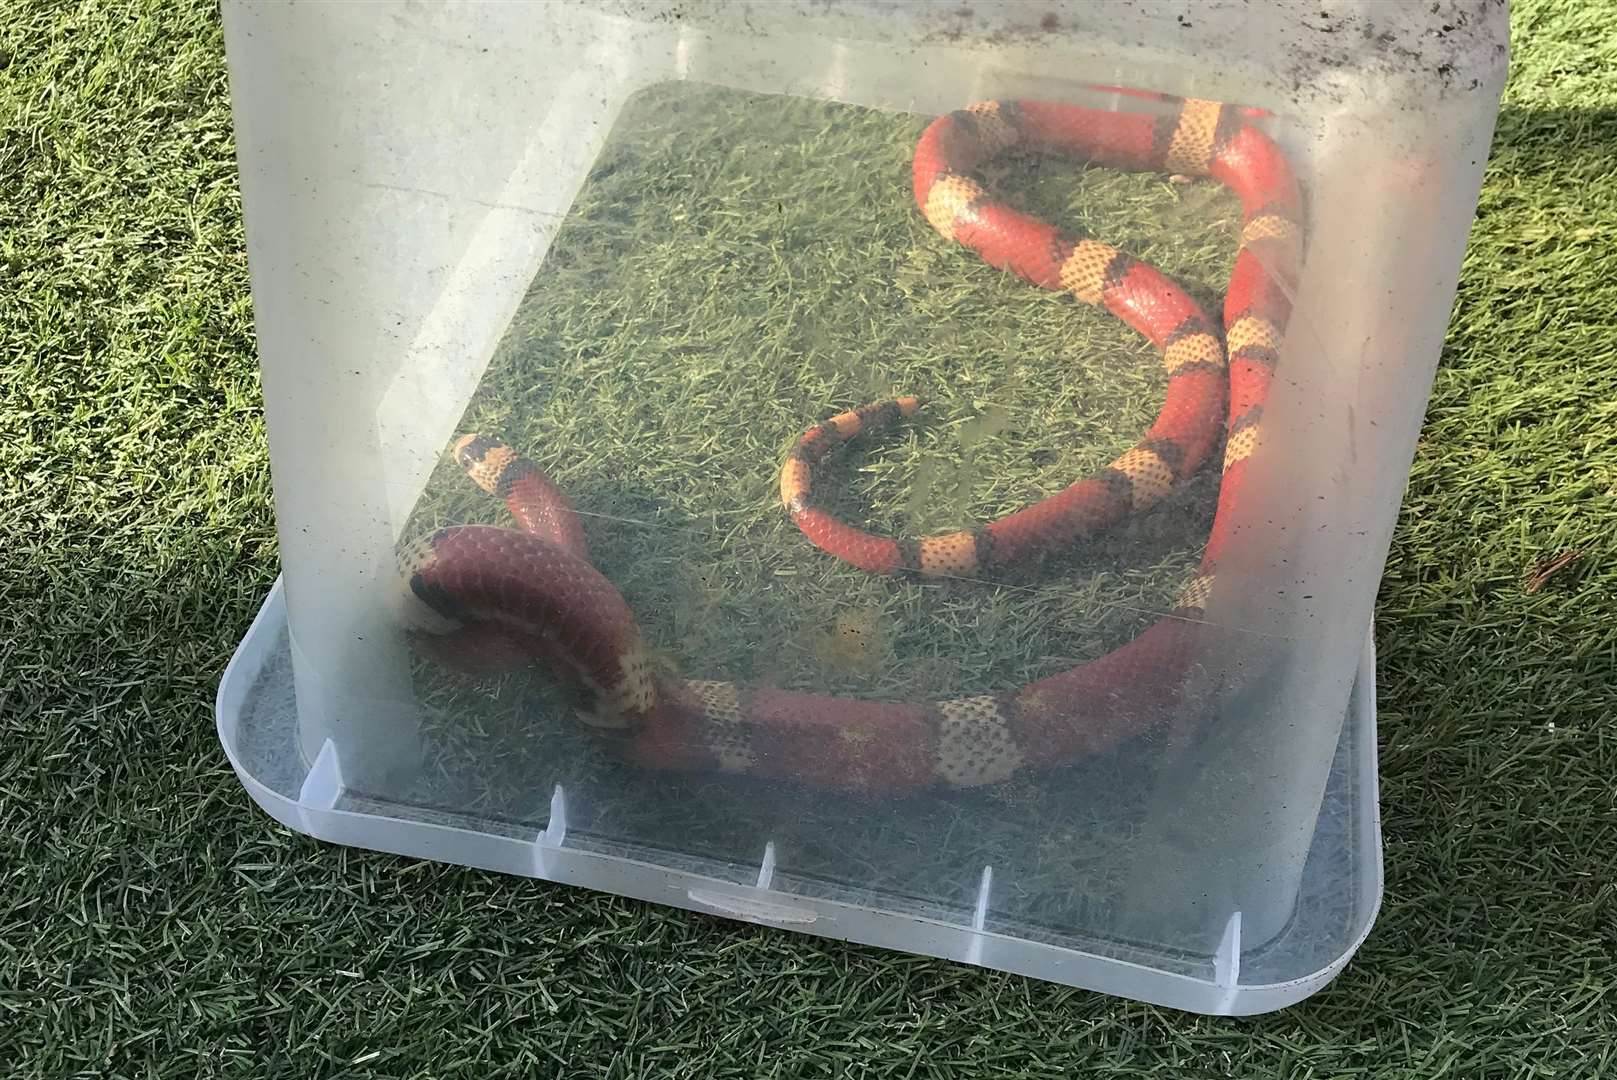 The three-foot snake was found in a garden in Margate. Picture: RSPCA (7464561)